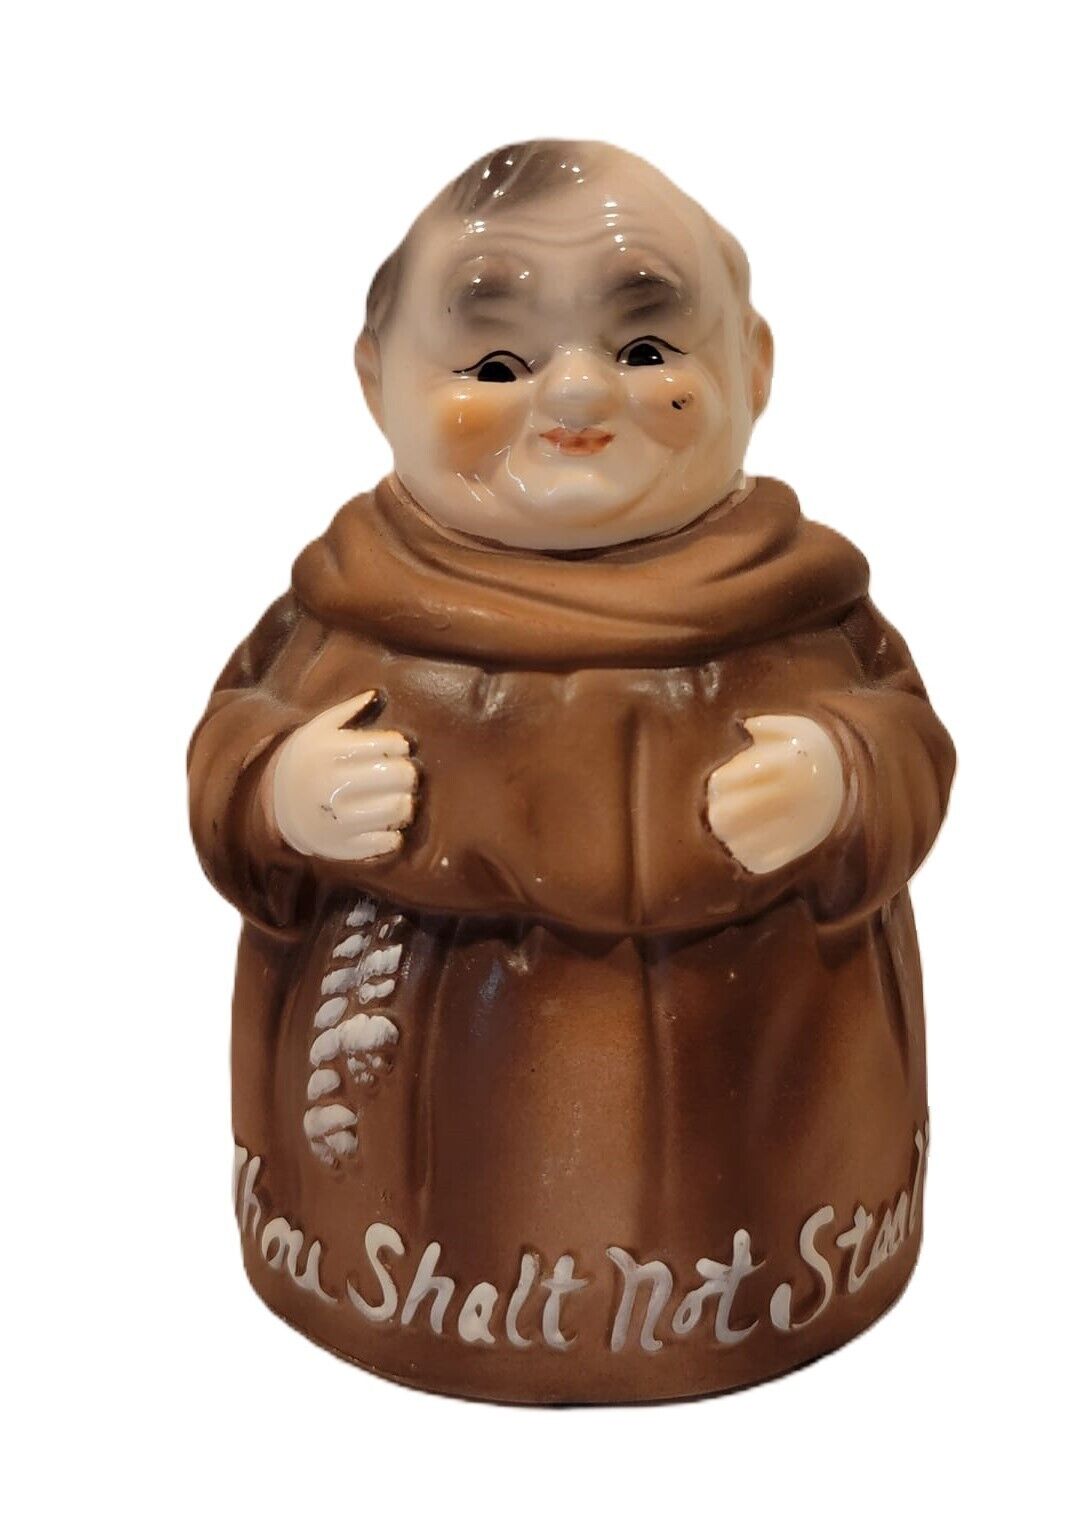 Vintage Friar Monk Bank Thou Shall Not Steal  1960s Giftware Handpainted